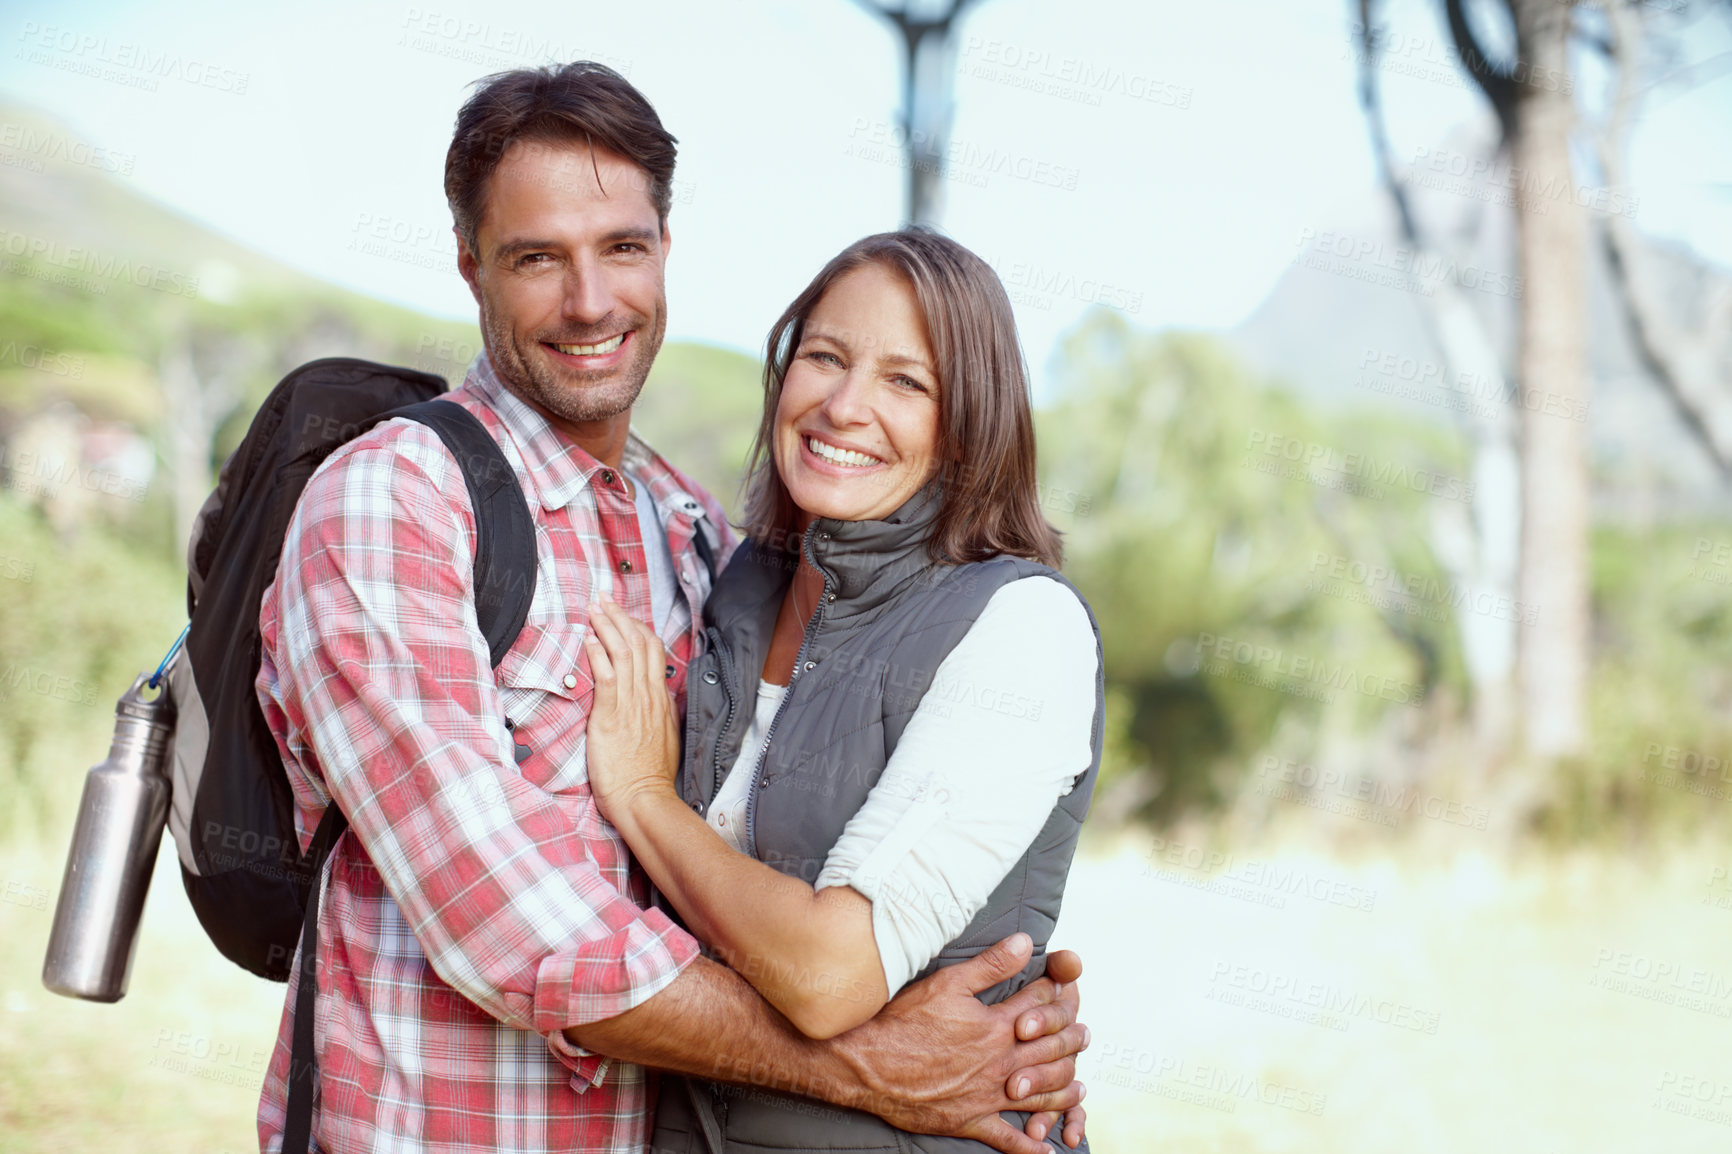 Buy stock photo A young couple posing with their hiking gear